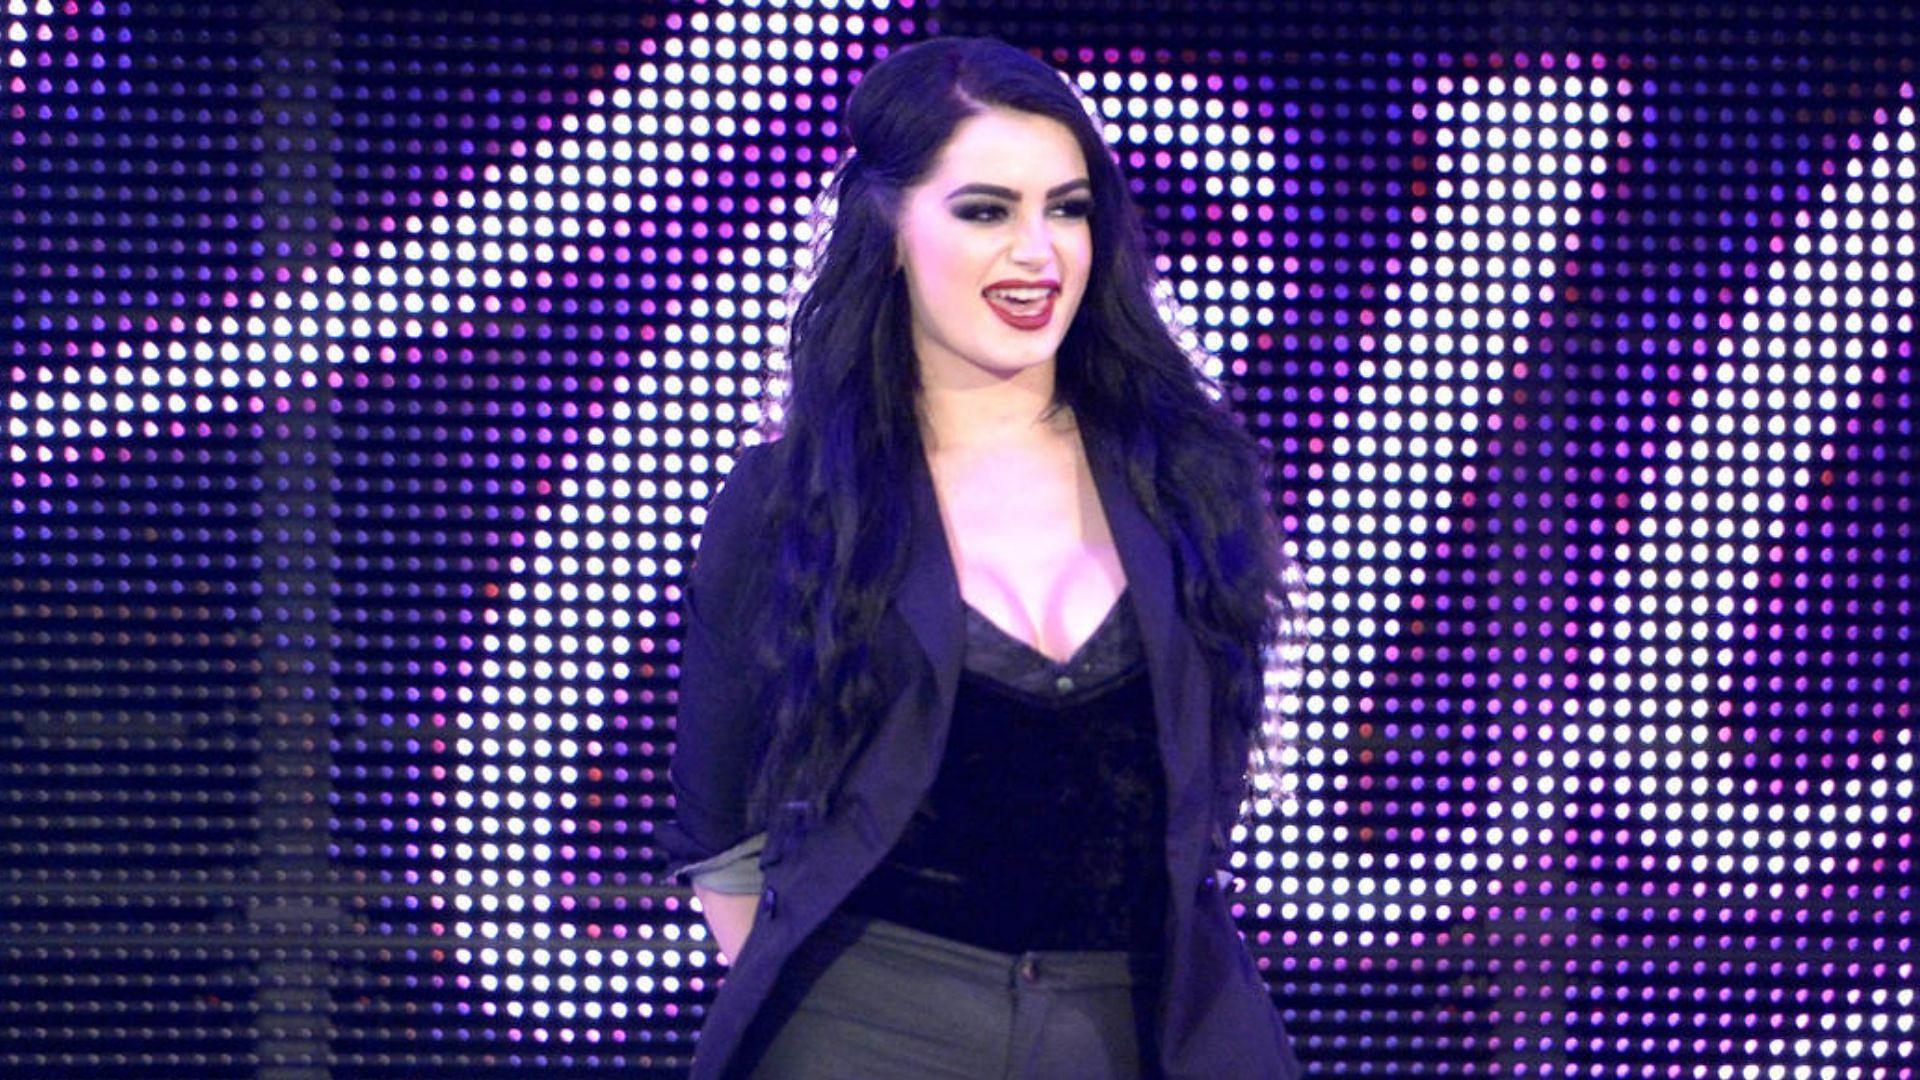 Paige making her entrance on WWE TV